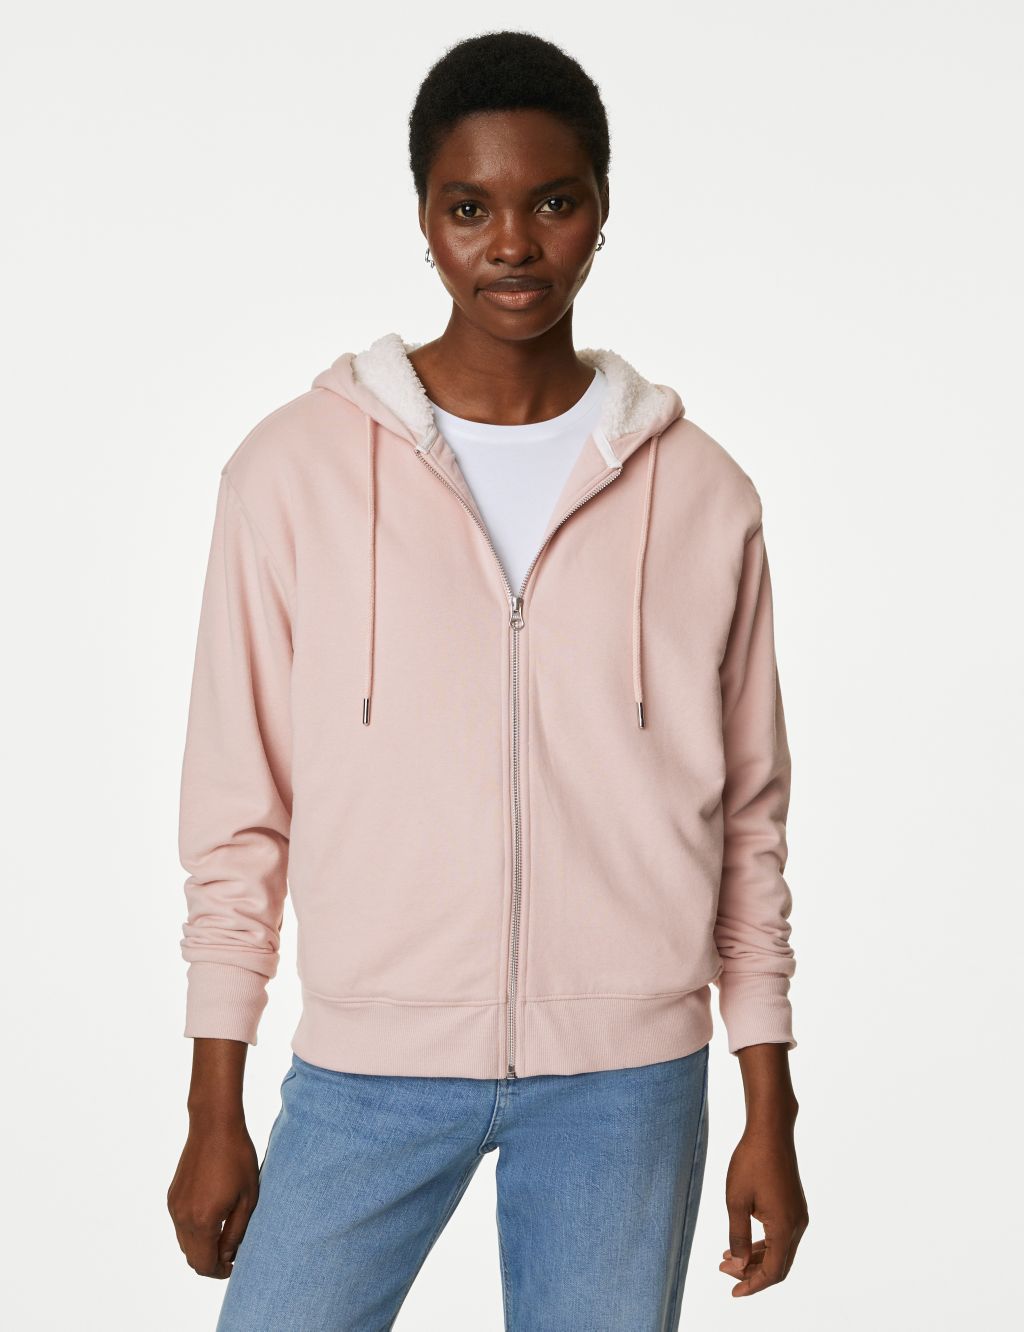 Cotton Rich Borg Lined Zip Up Hoodie image 1